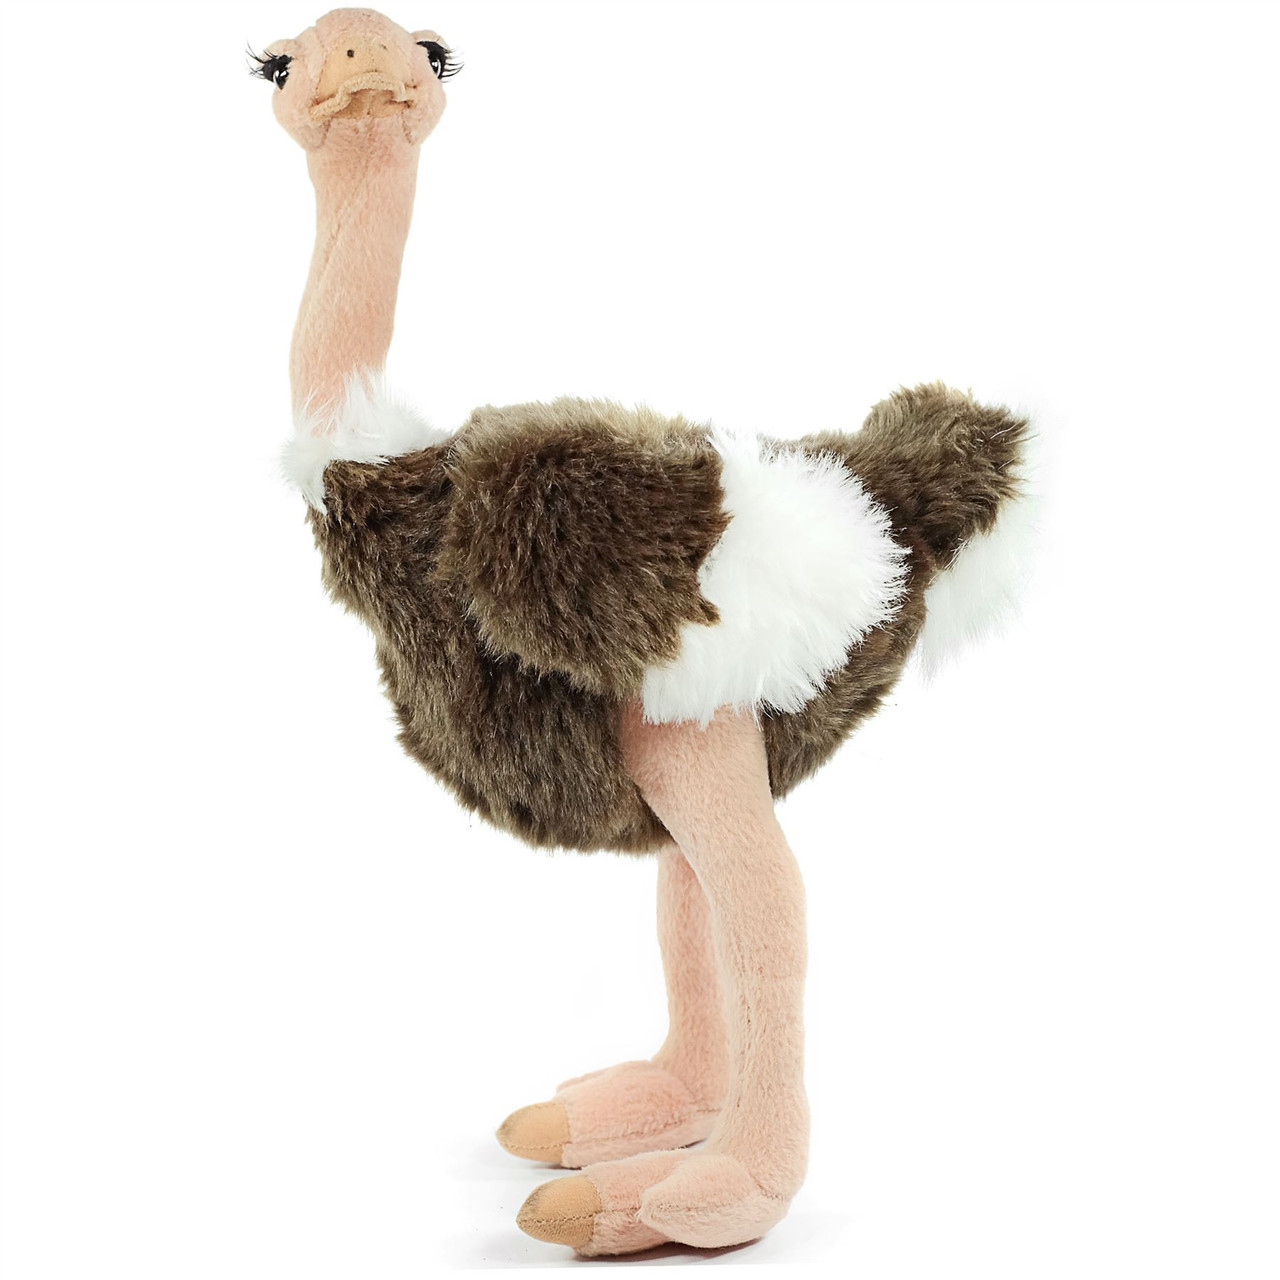 VIAHART Ola The Ostrich 14 inch Realistic Looking Stuffed Animal Plush by Tiger Tale Toys